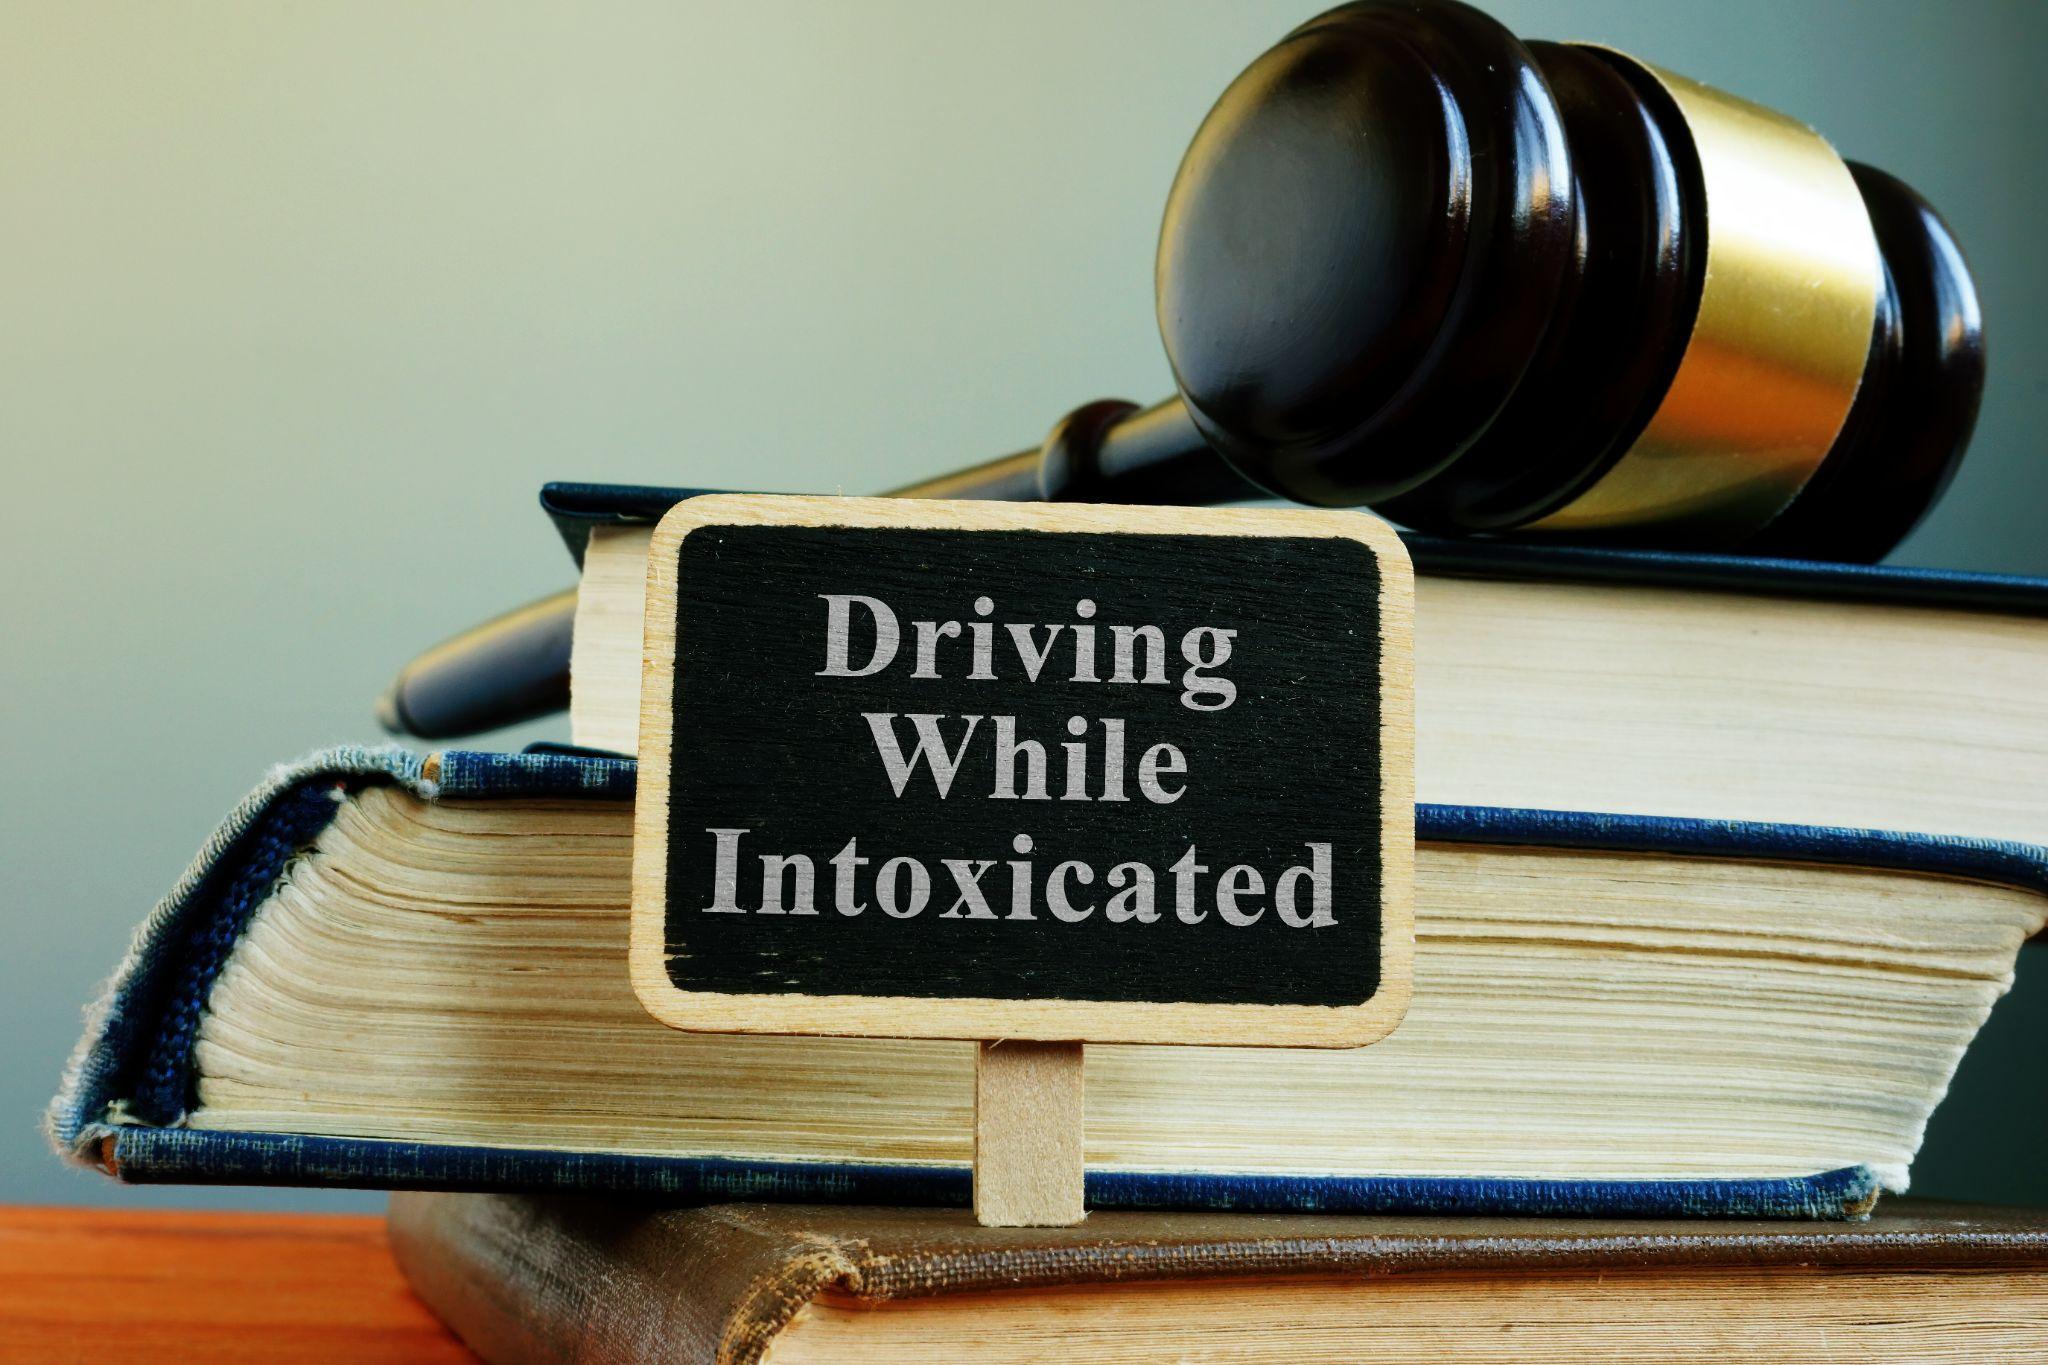 DWI driving while intoxicated law and books.